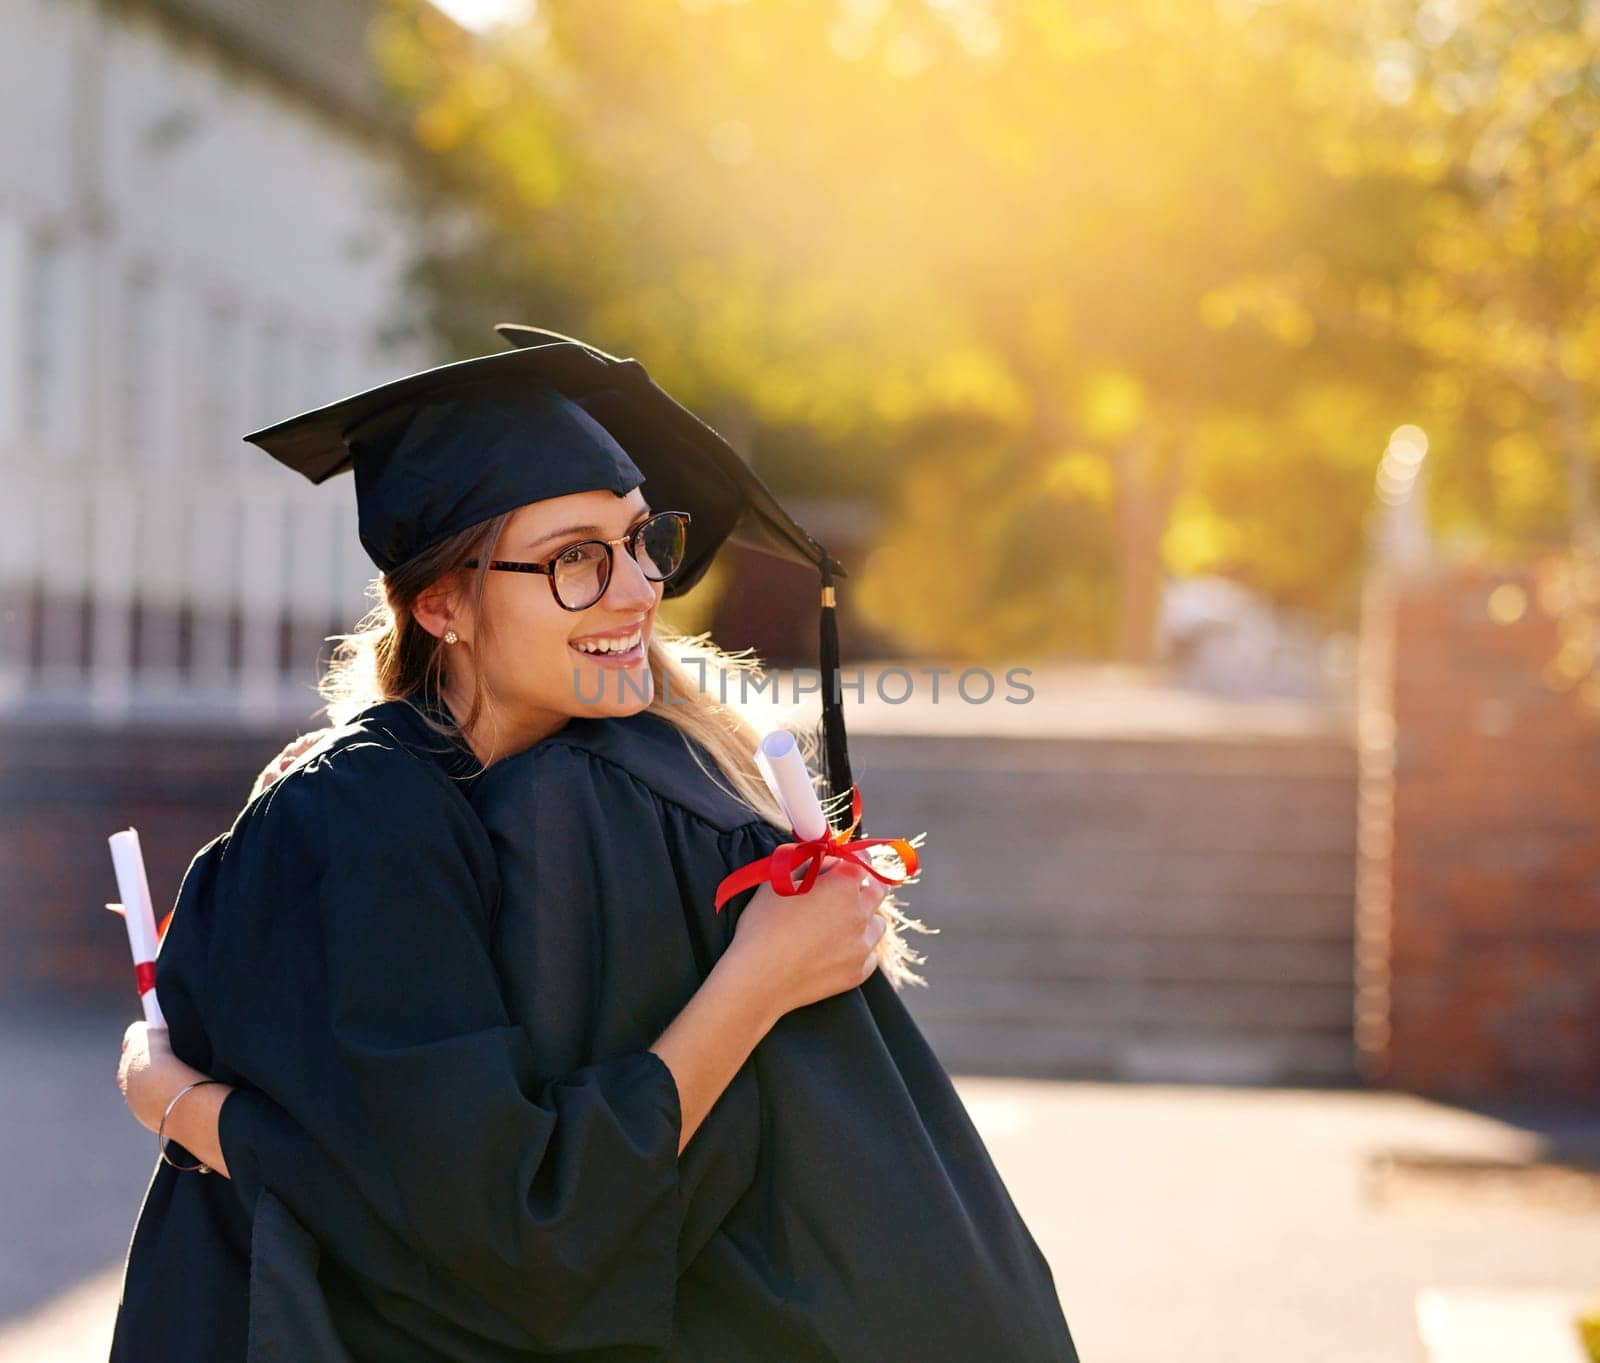 Women, students and hug at graduation as college or university friends with achievement. Happy people outdoor to celebrate education goals, certificate of success or future at school event with pride.